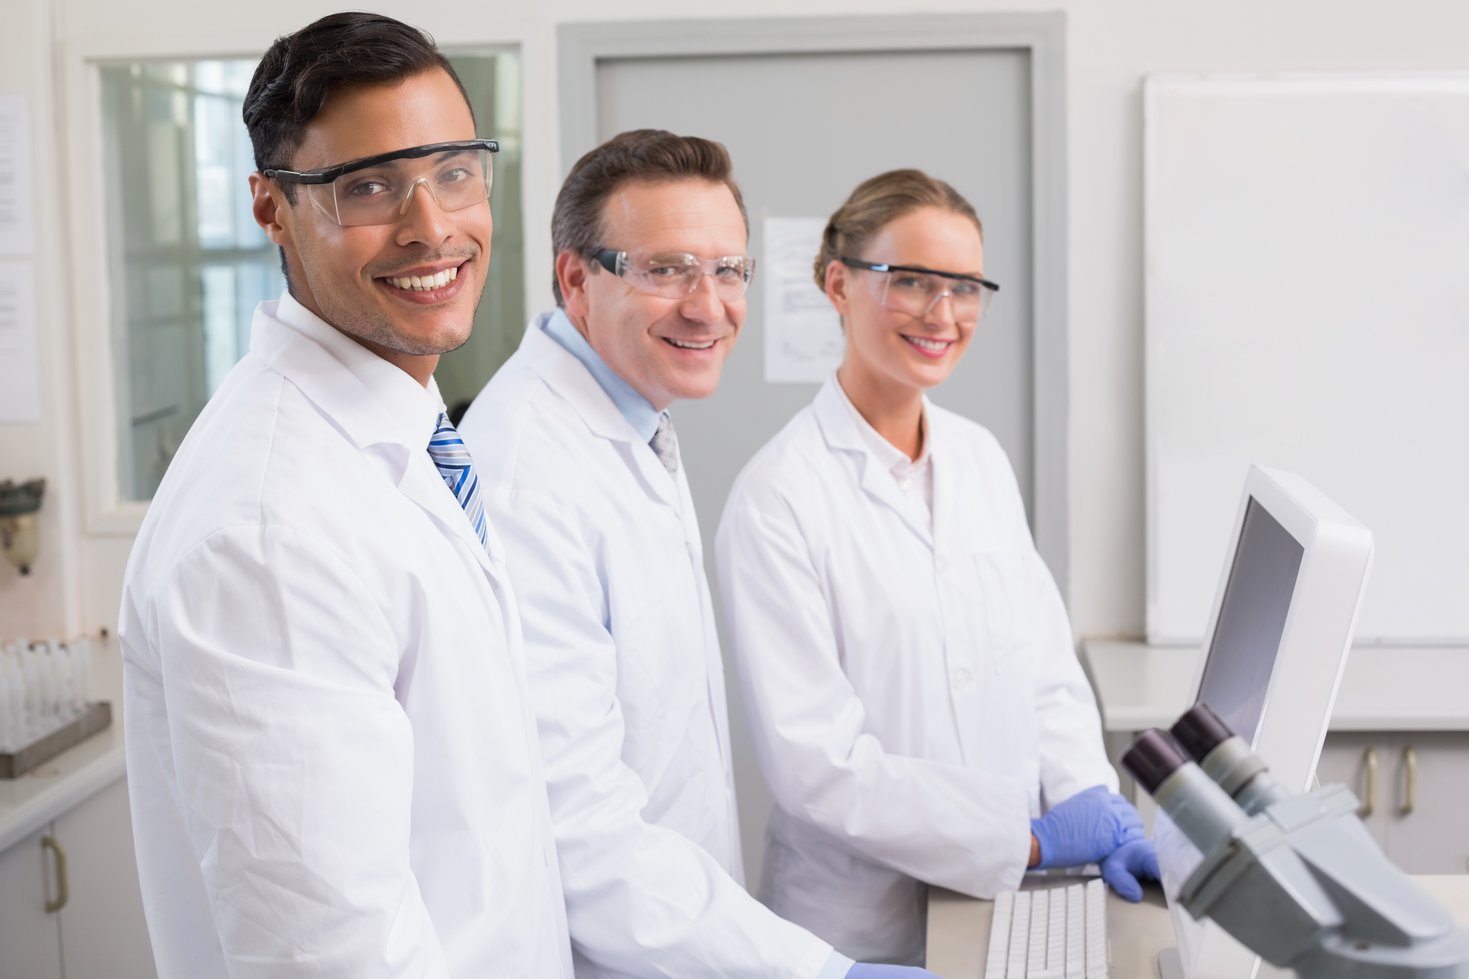 Scientists-Smiling-Laboratory-Clinical-Research.jpg